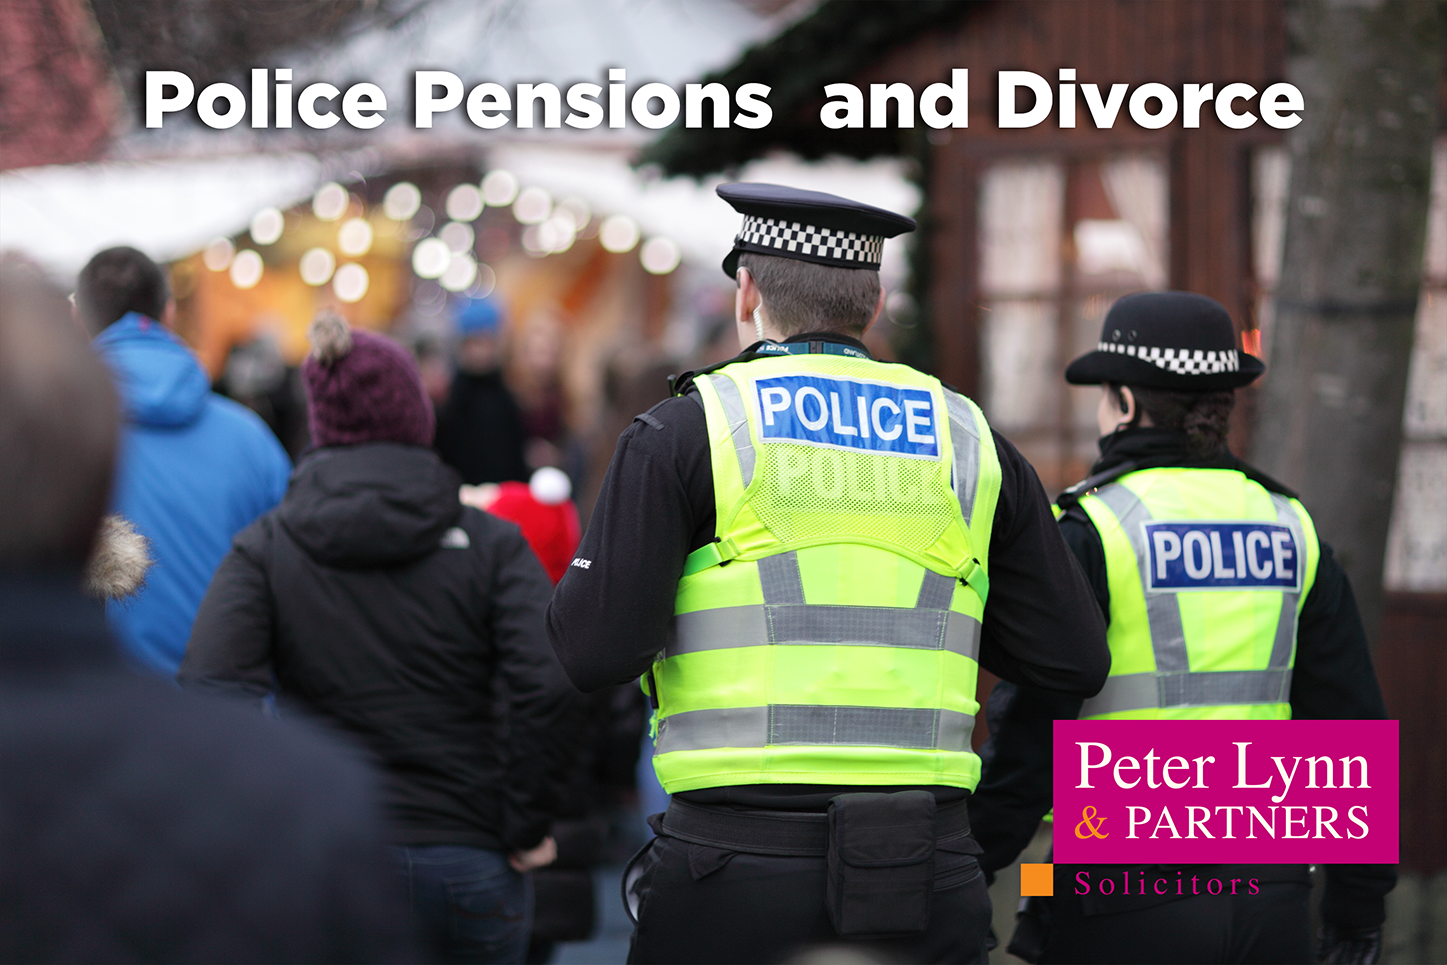 Police Pensions and Divorce